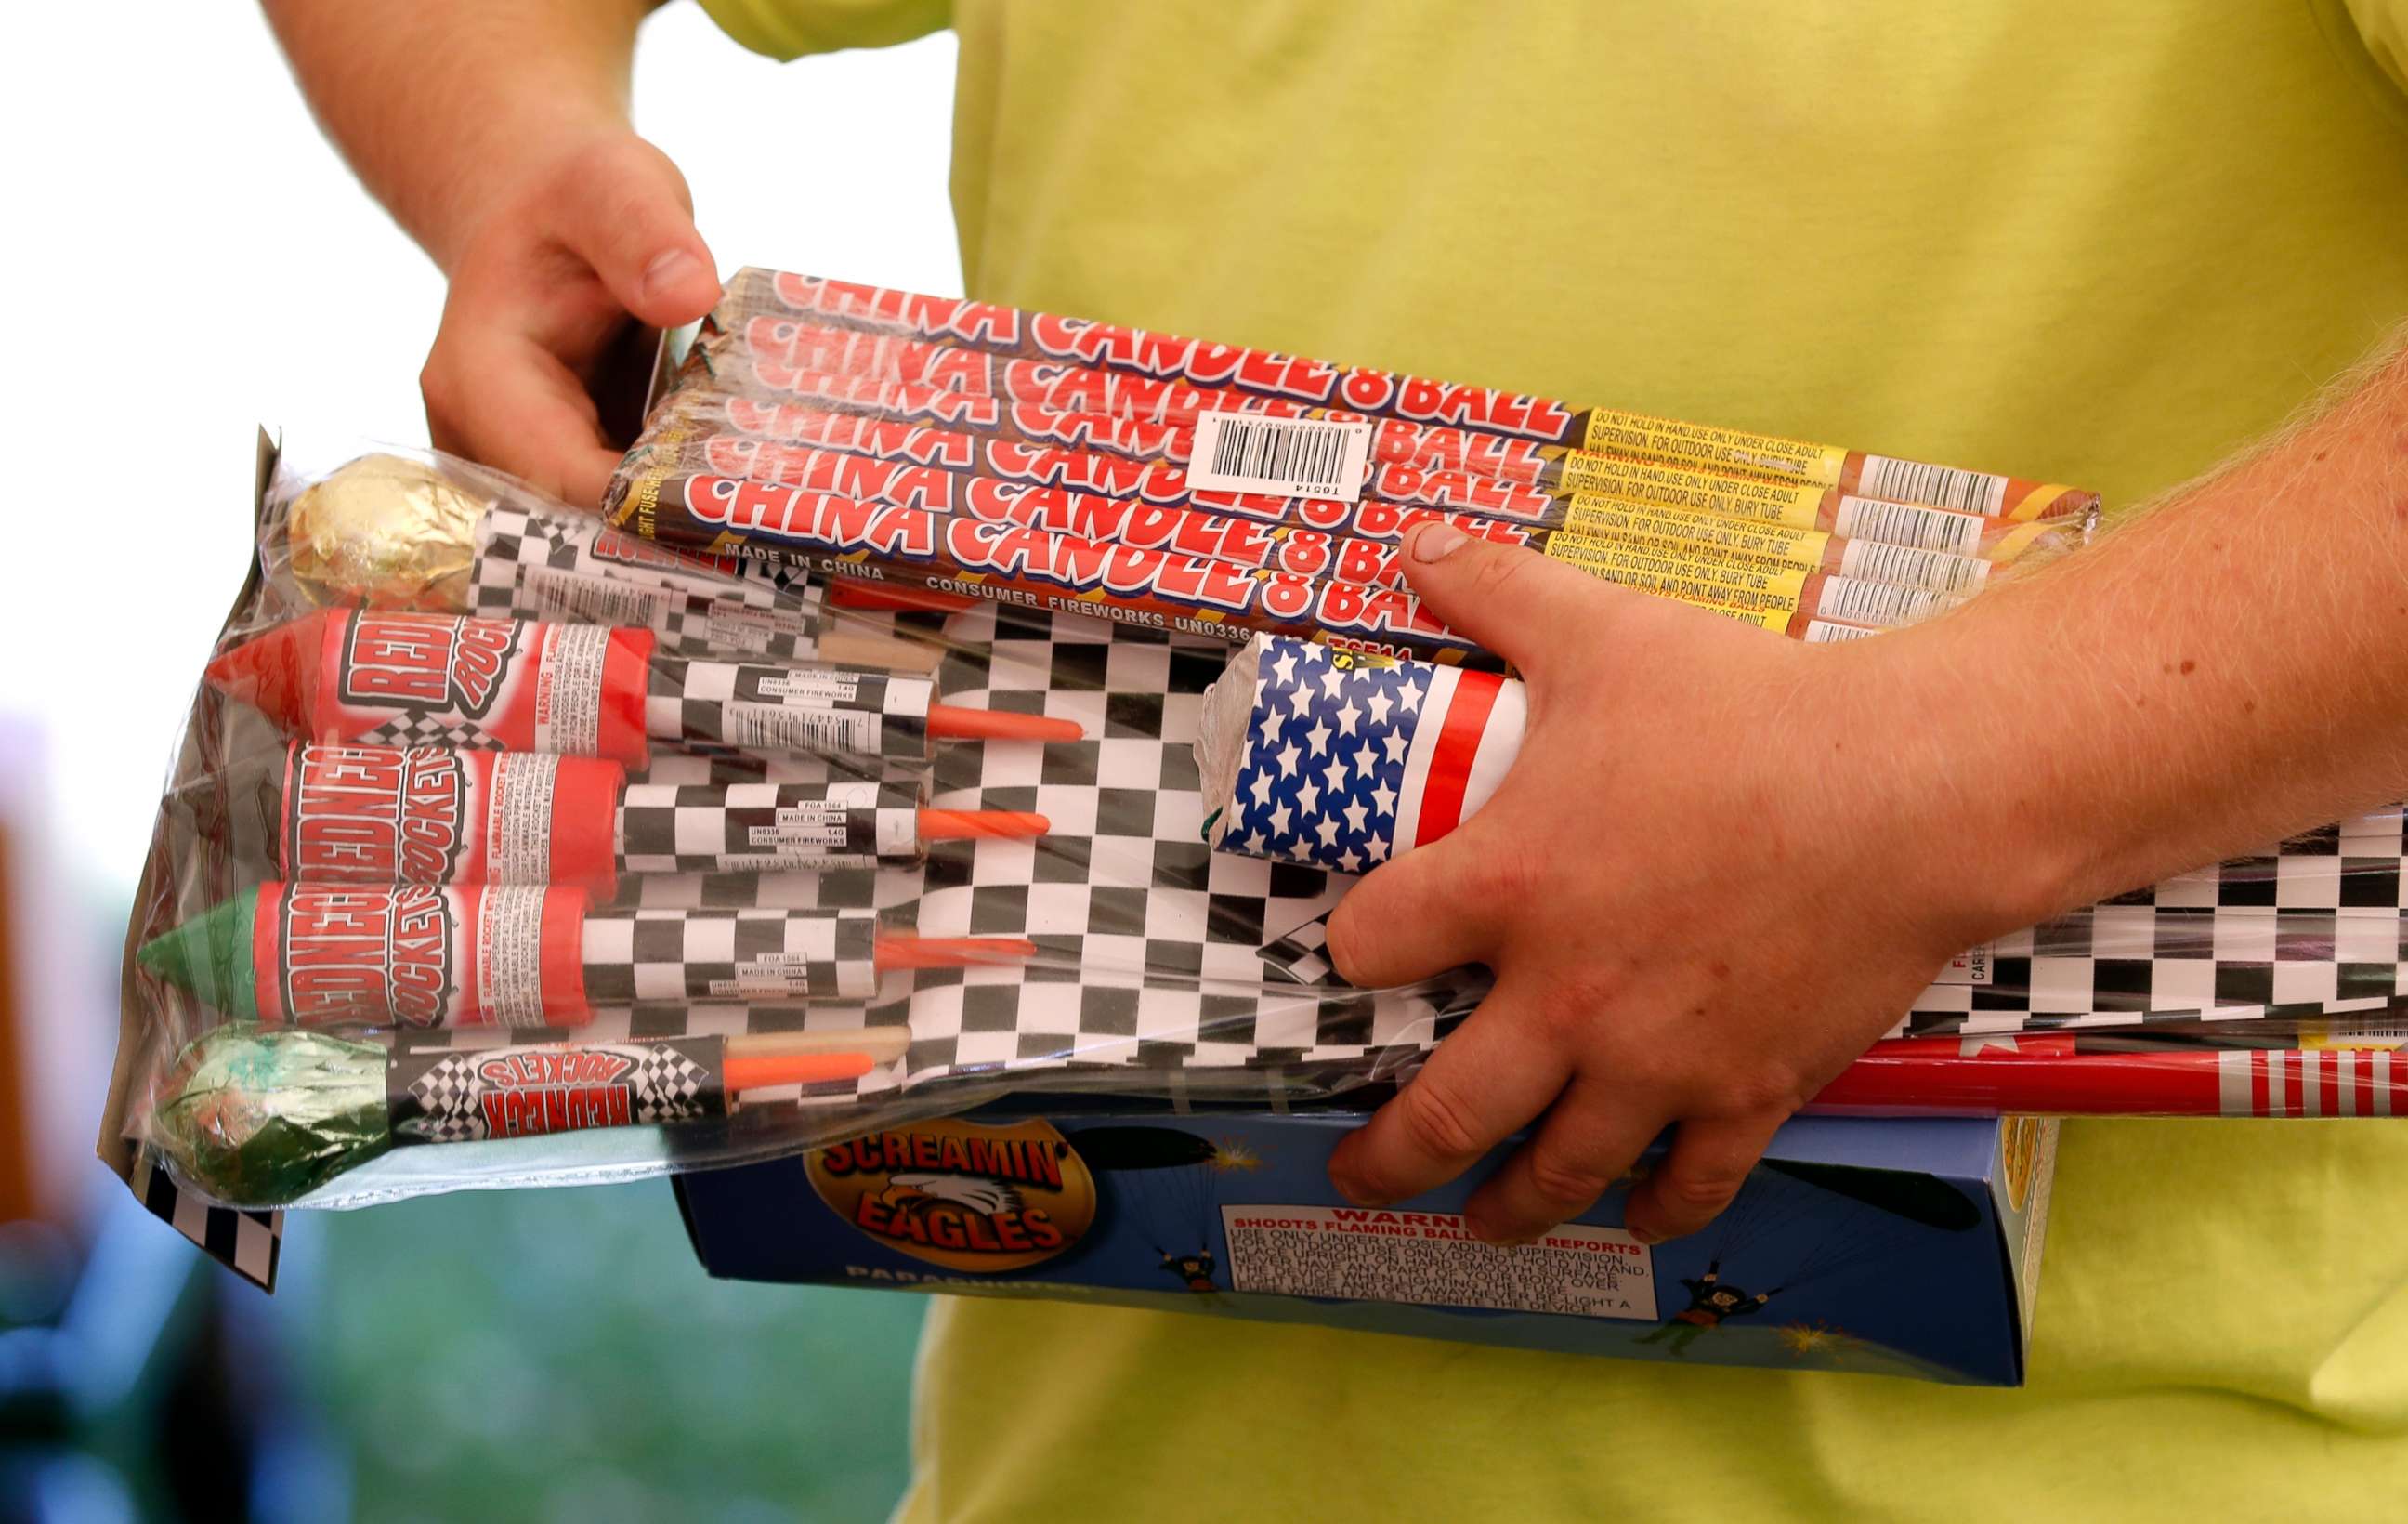 PHOTO: In this file photo, Julian Gibson holds packages of fireworks before buying them in a tent owned by the Iowa Fireworks Company, in Adel, Iowa, June 16, 2017.